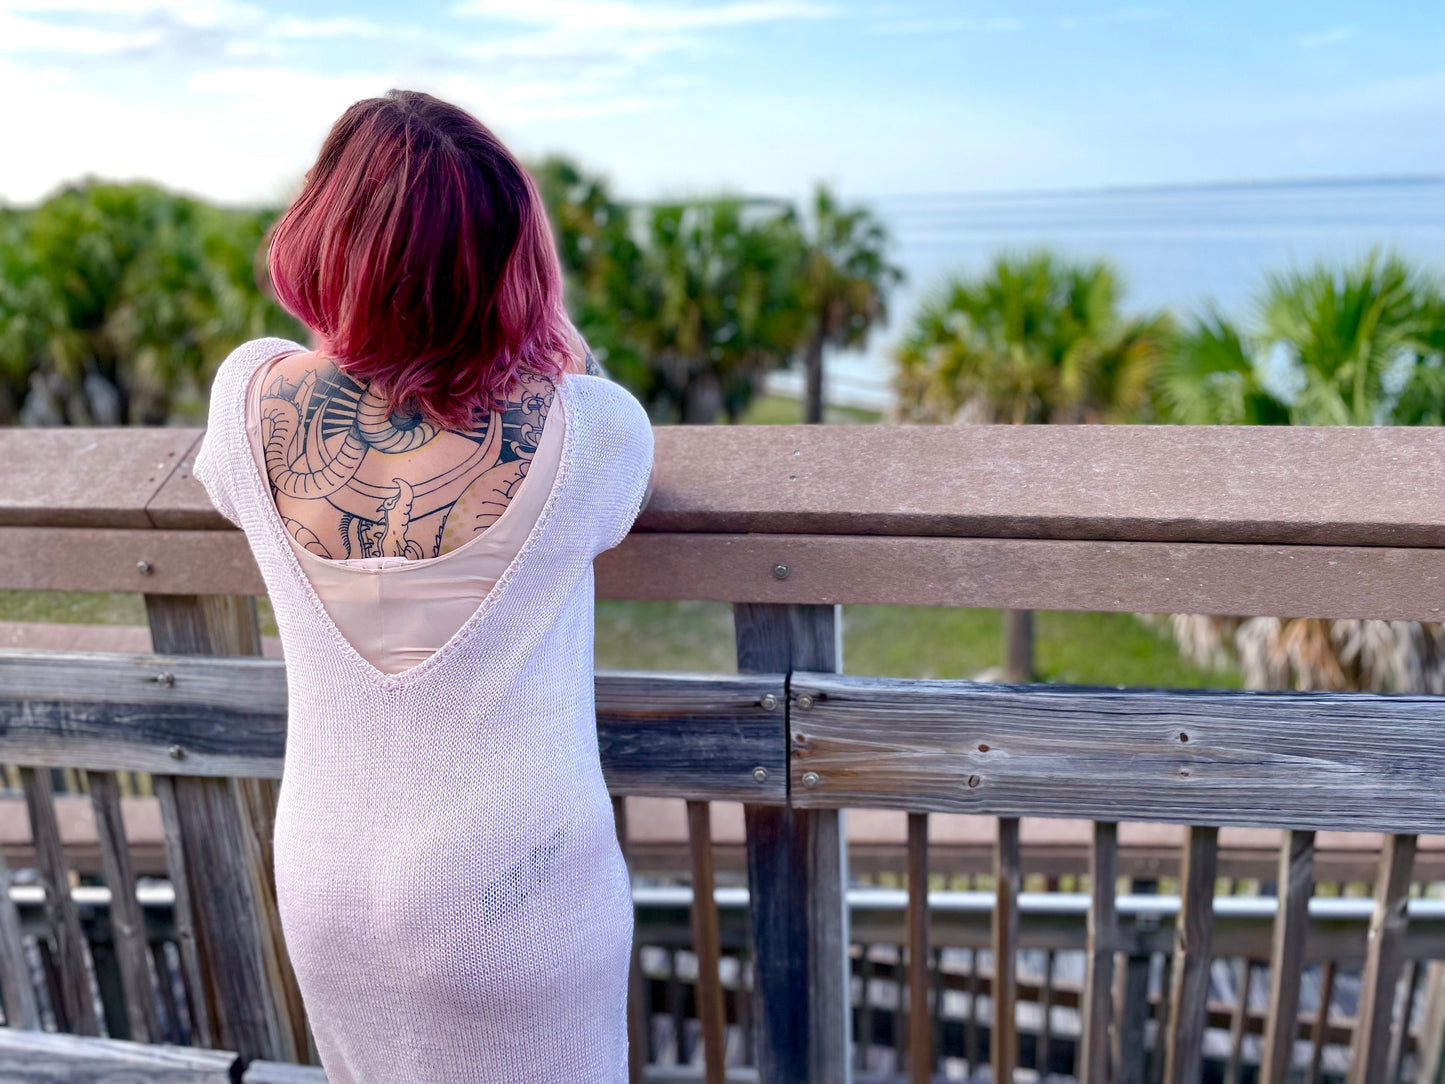 Bess leans against a bridge railing, her back to the camera. She wears a knit white dress, the back scooped to show off her tattoos.